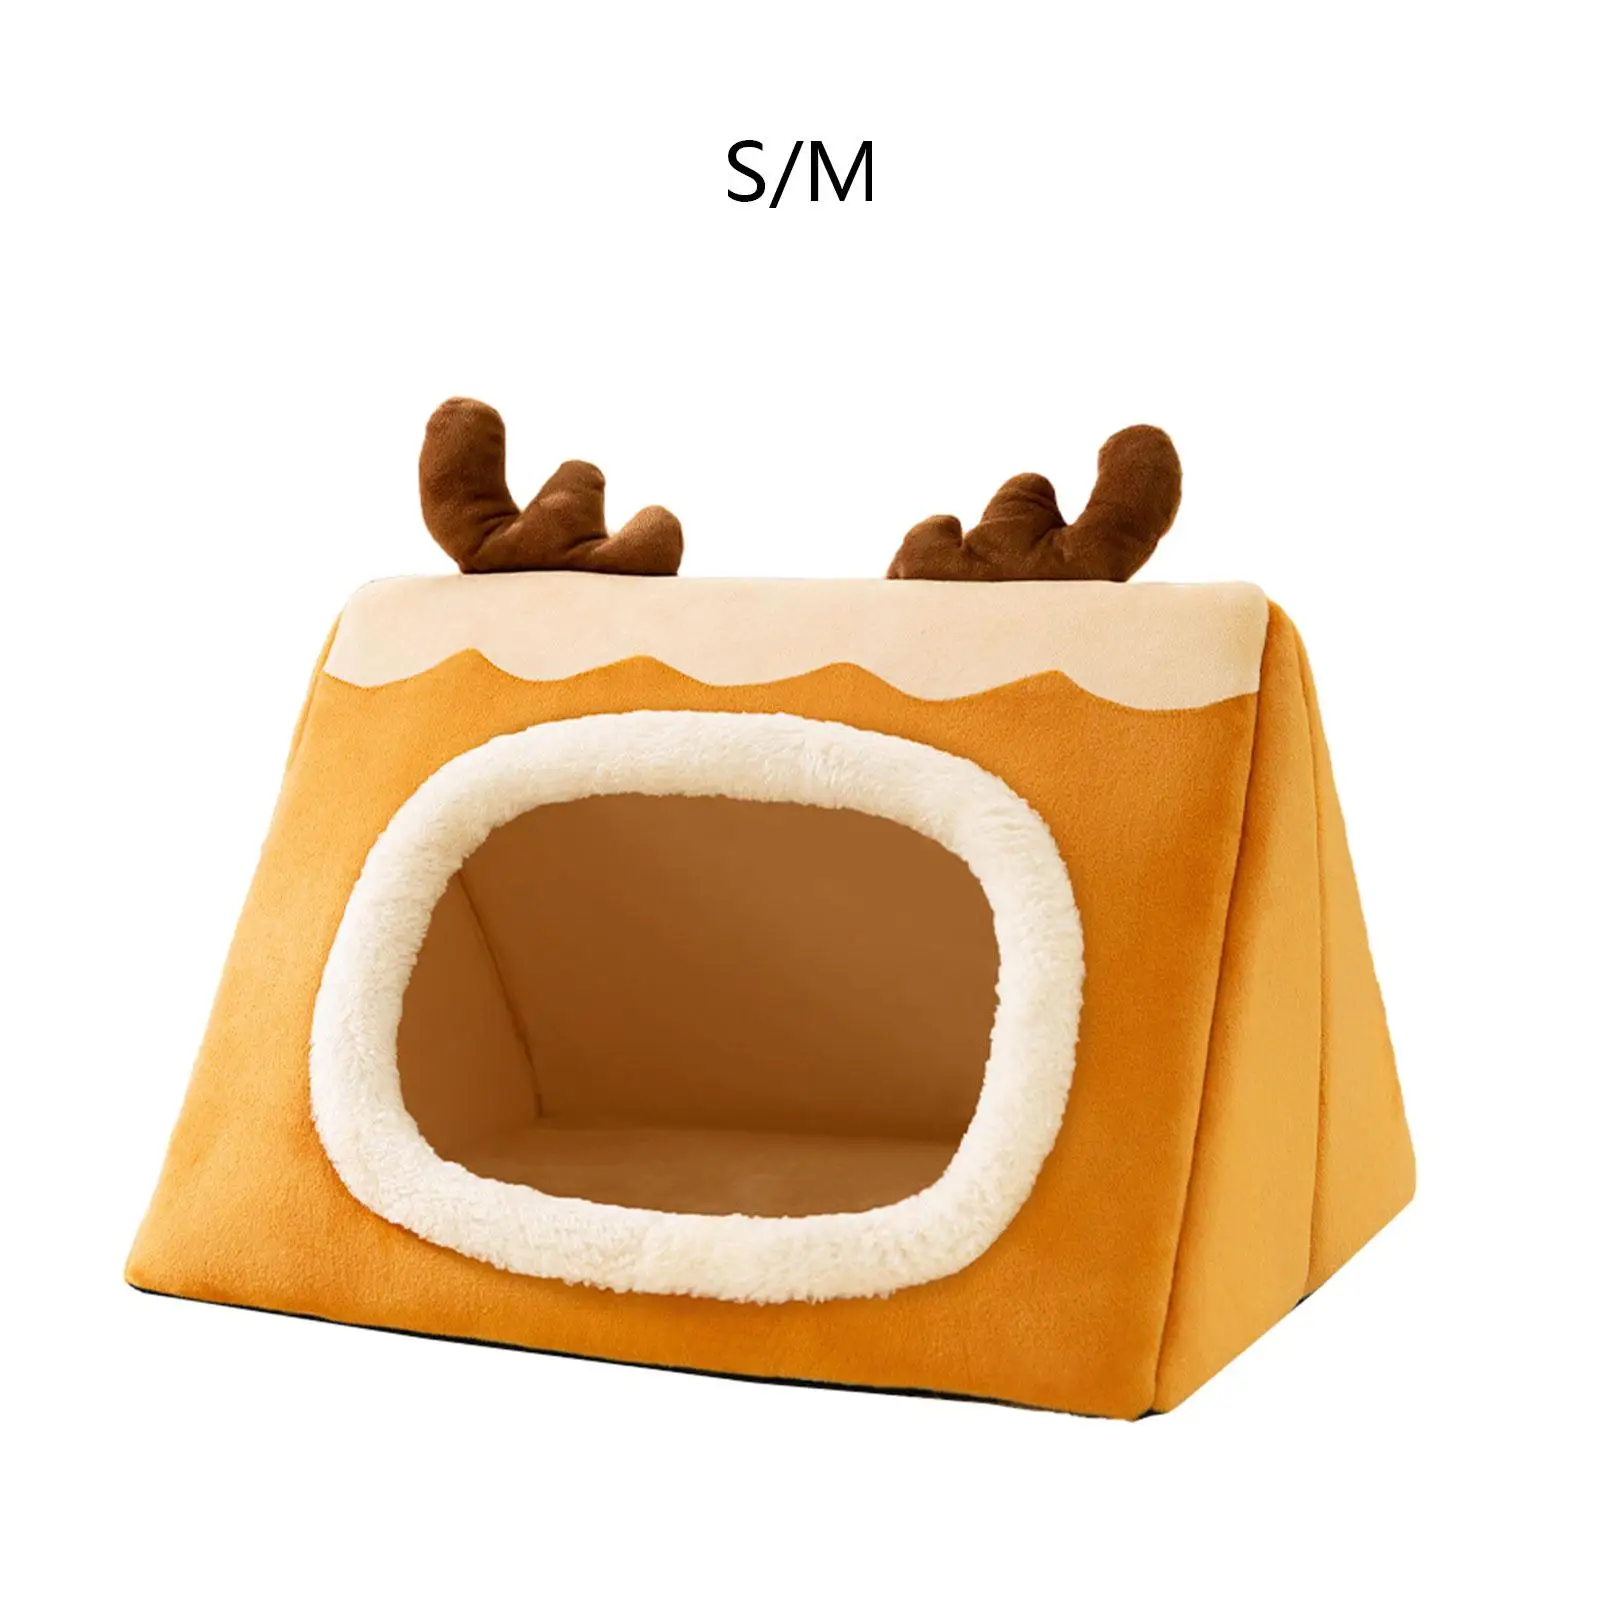 Pet Bed Washable Non Slip Semi Enclosed Warm Pet House Cute Pet Cat Nest Cat Bed for Kitty Pets Dogs Cat Small Animals Indoor